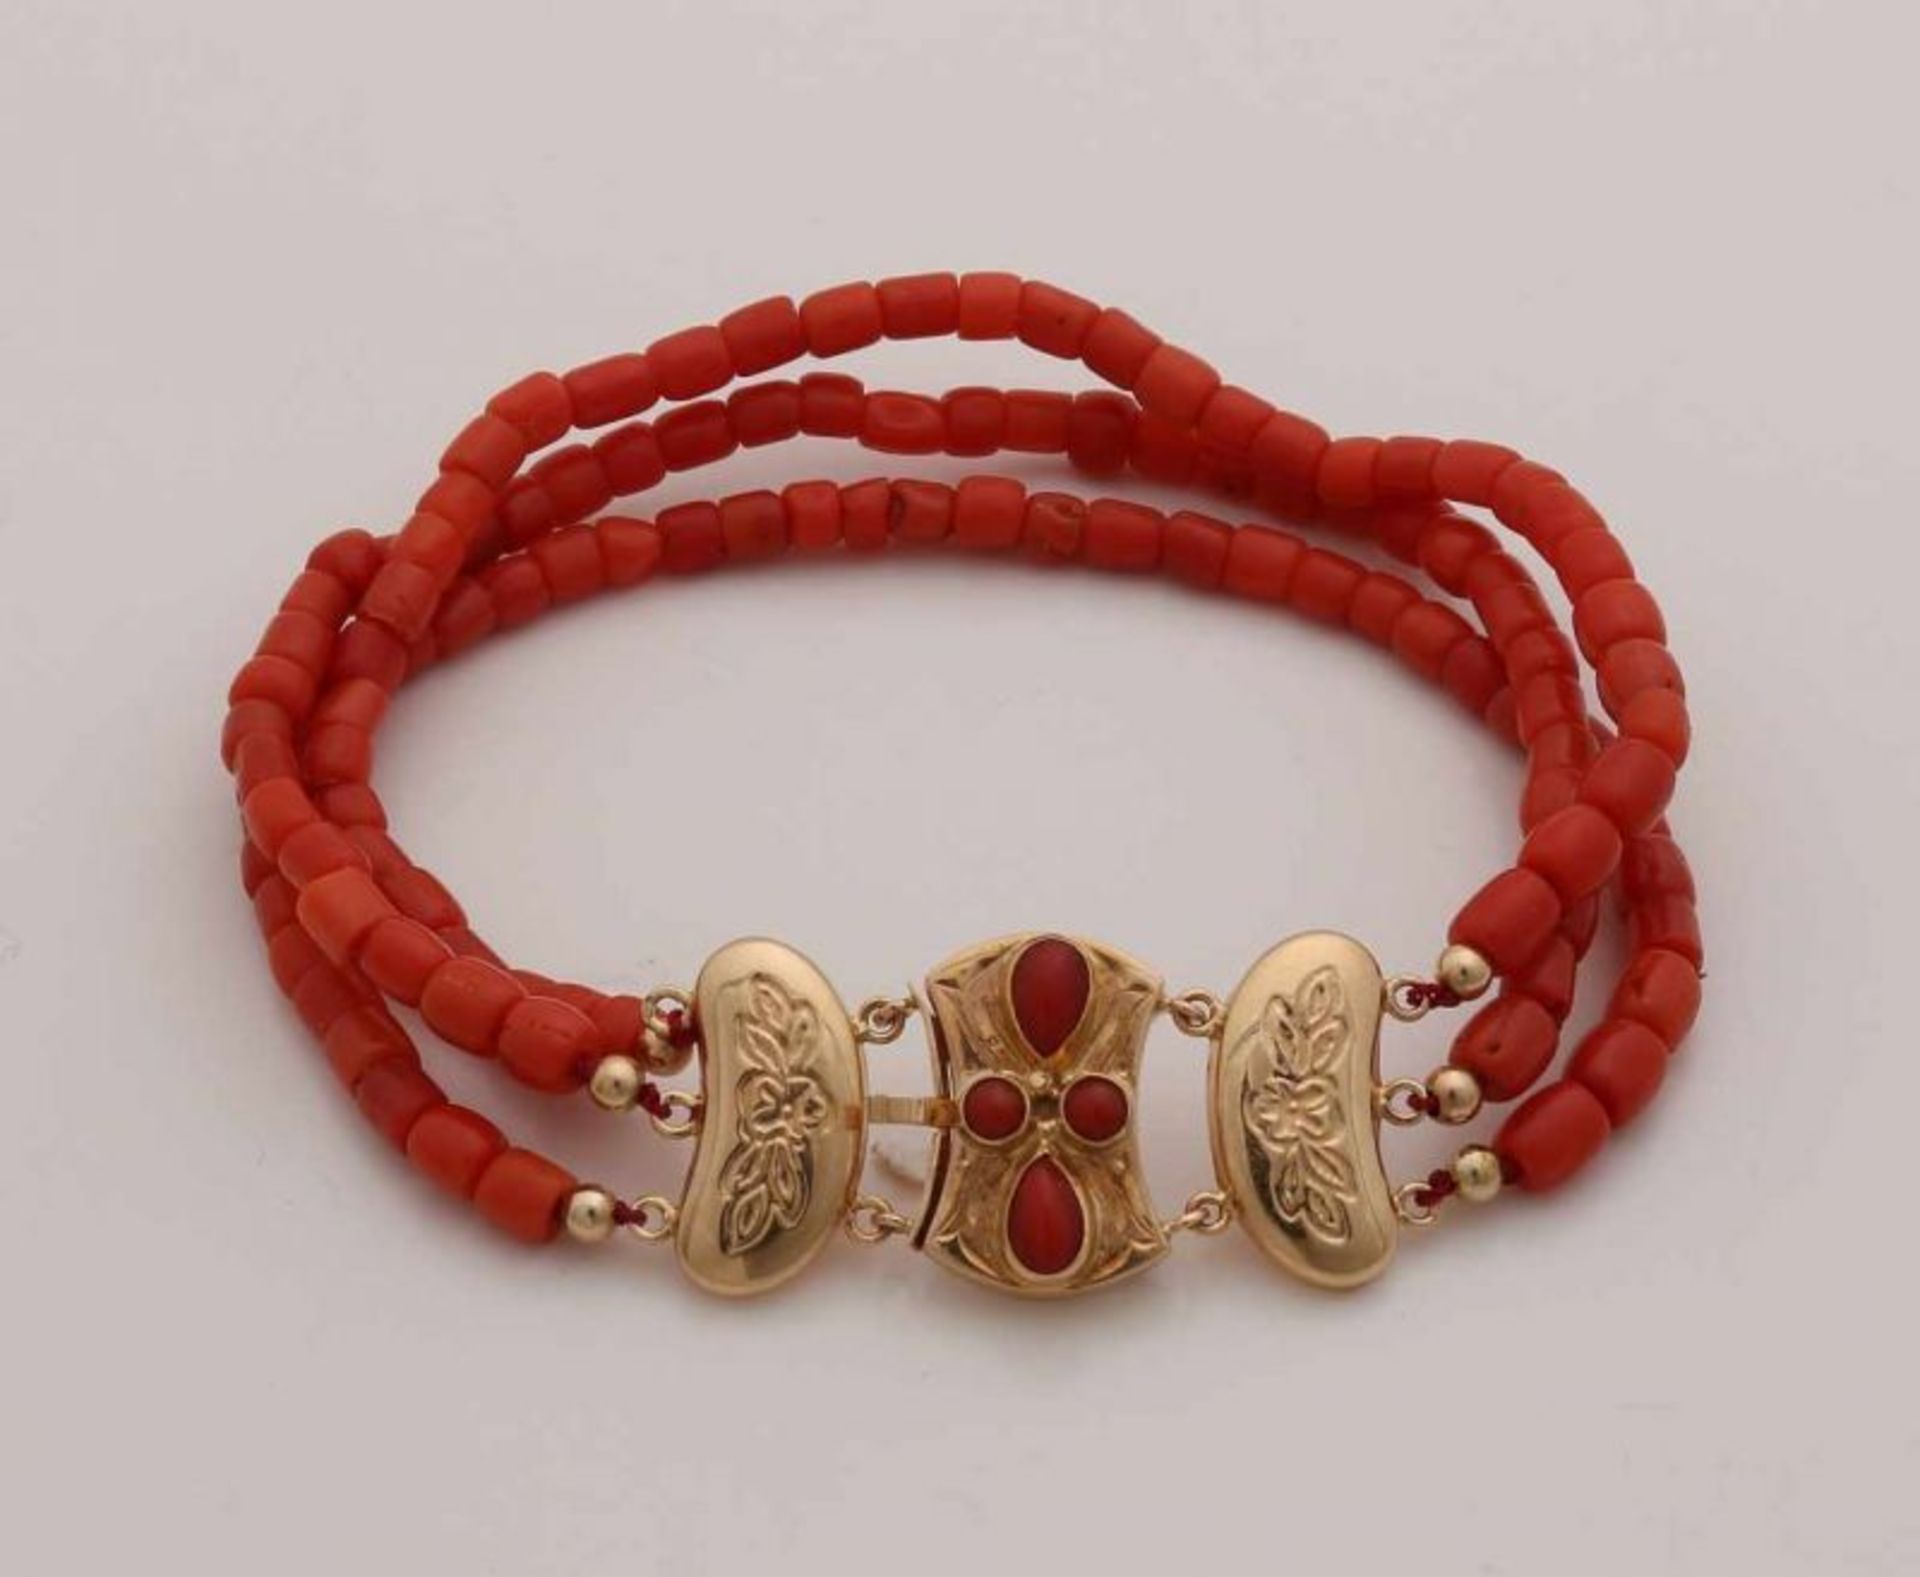 Bracelet with three rows of coral, ø 4 mm, attached to a yellow gold molded closure with red coral